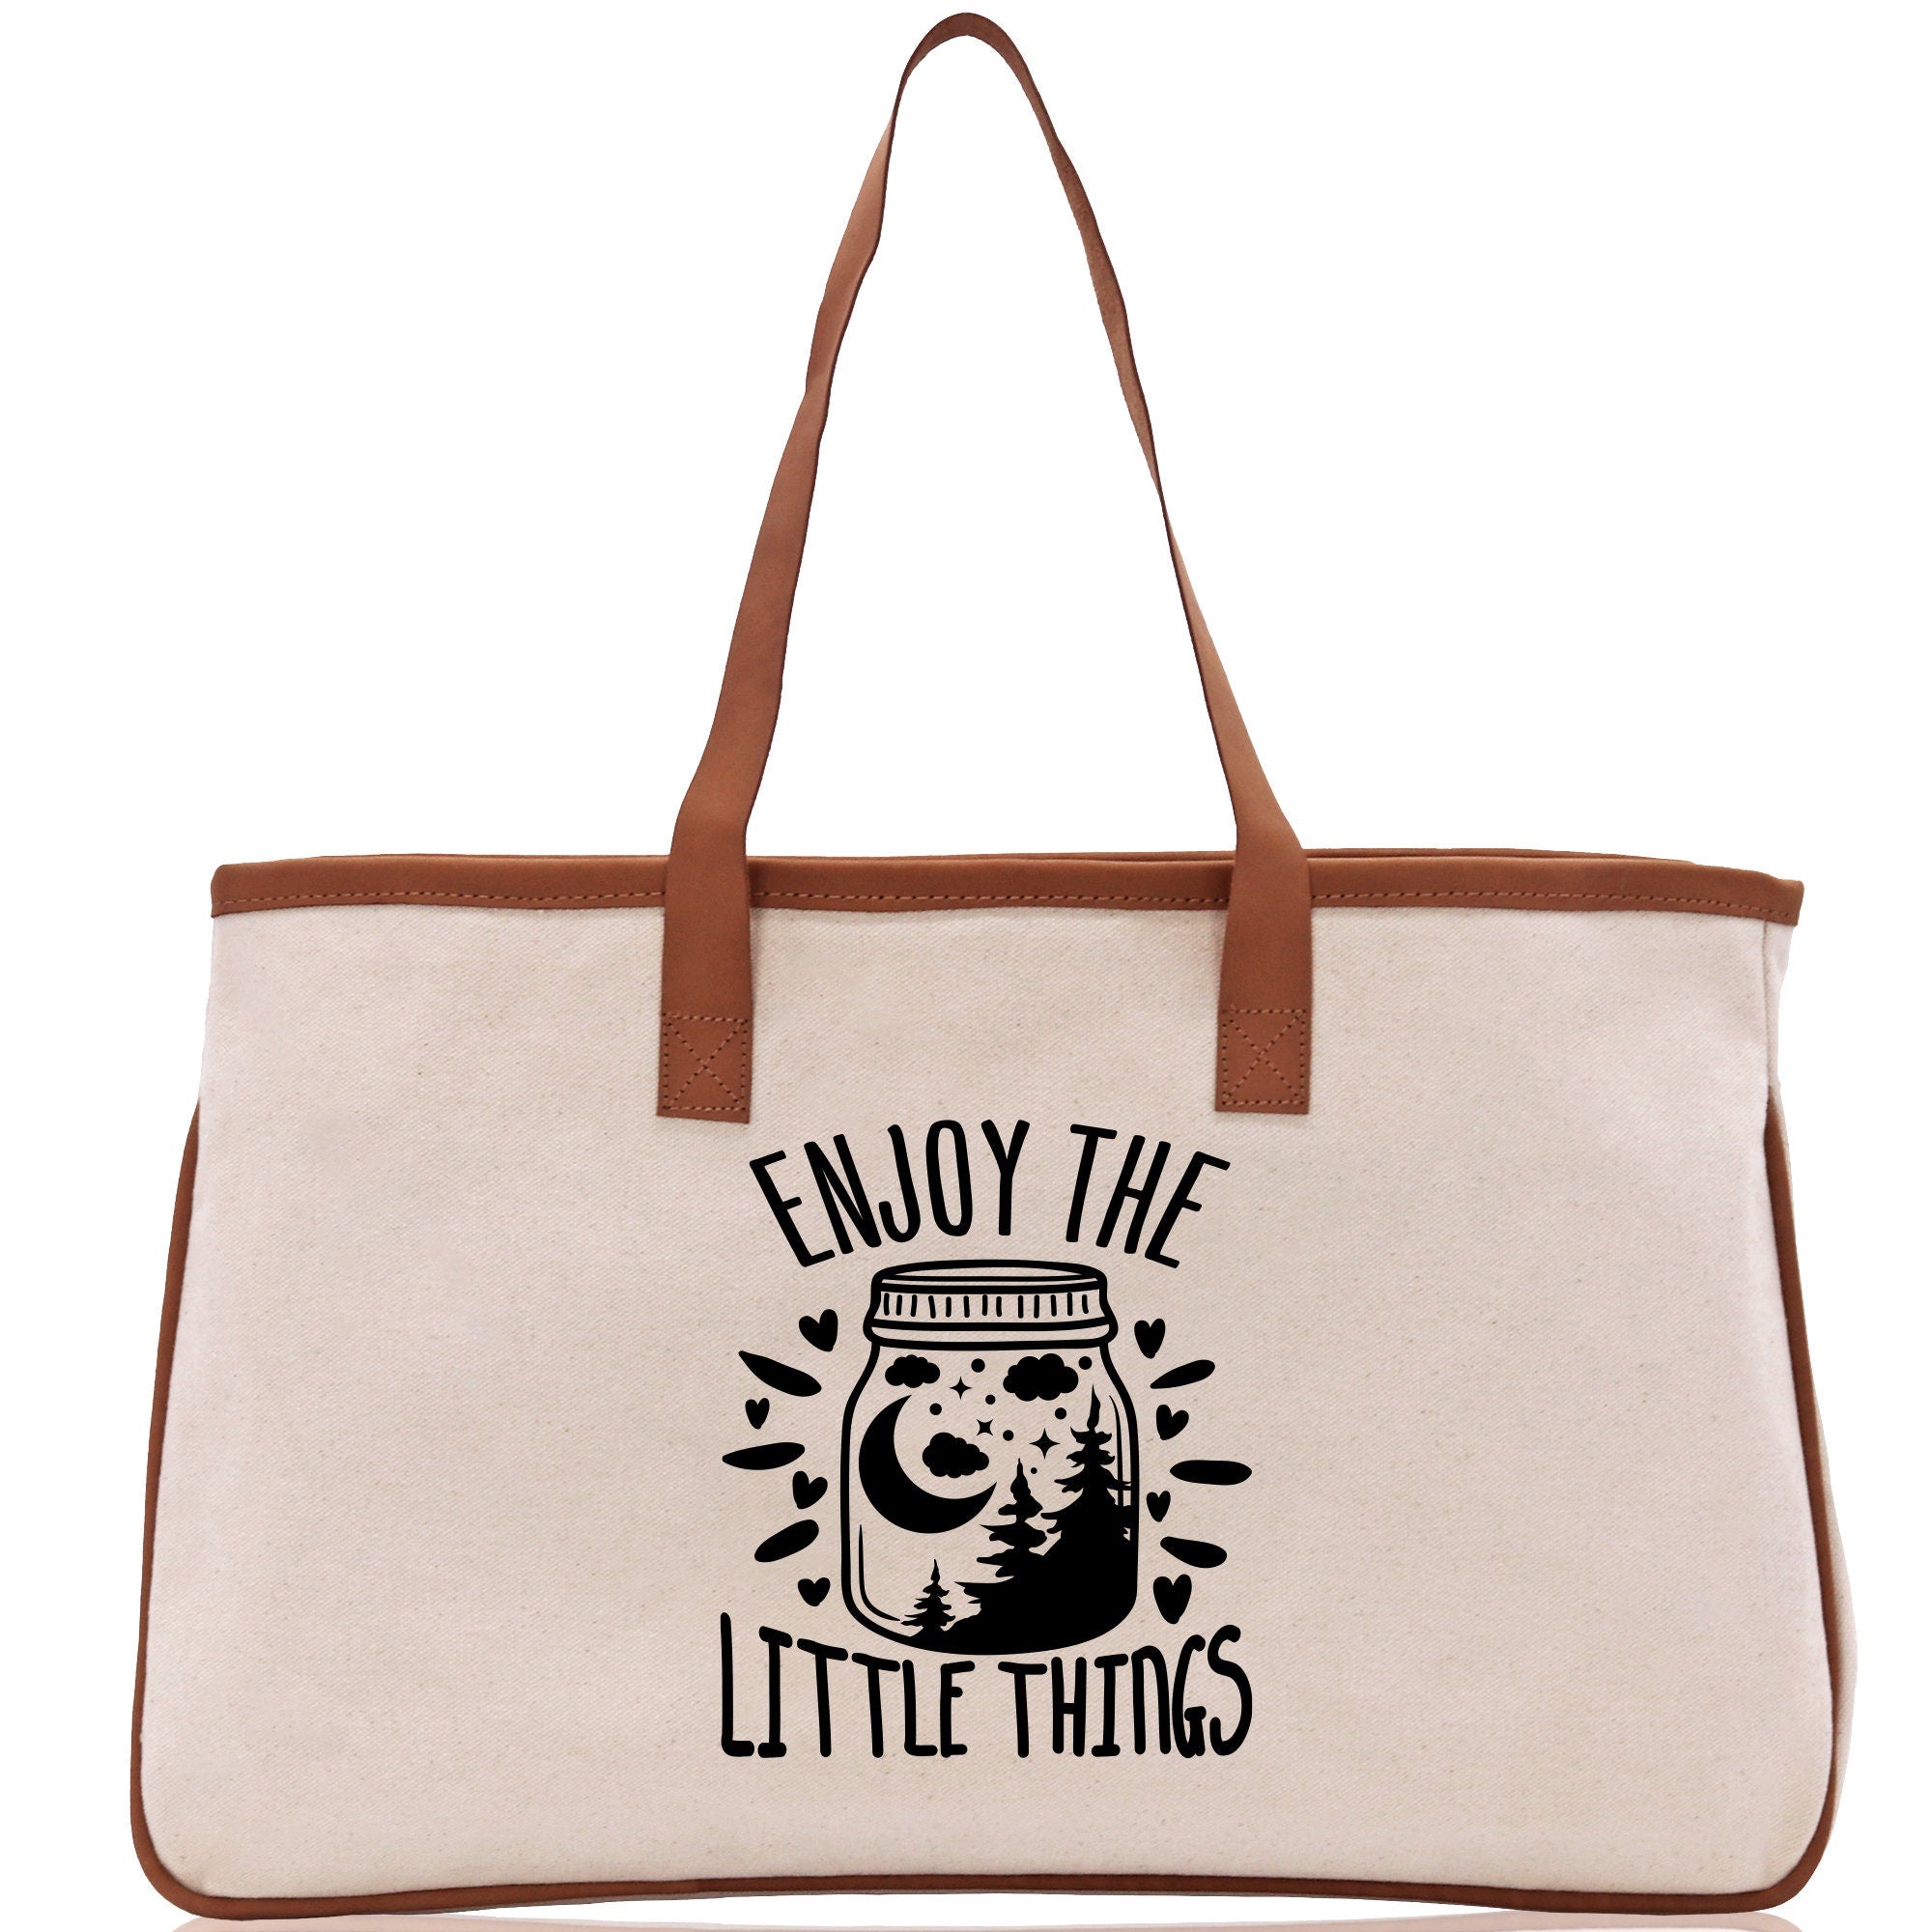 Enjoy the Little Things Cotton Canvas Chic Tote Bag Camping Tote Camping Lover Gift Tote Bag Outdoor Tote Multipurpose Weekender Tote